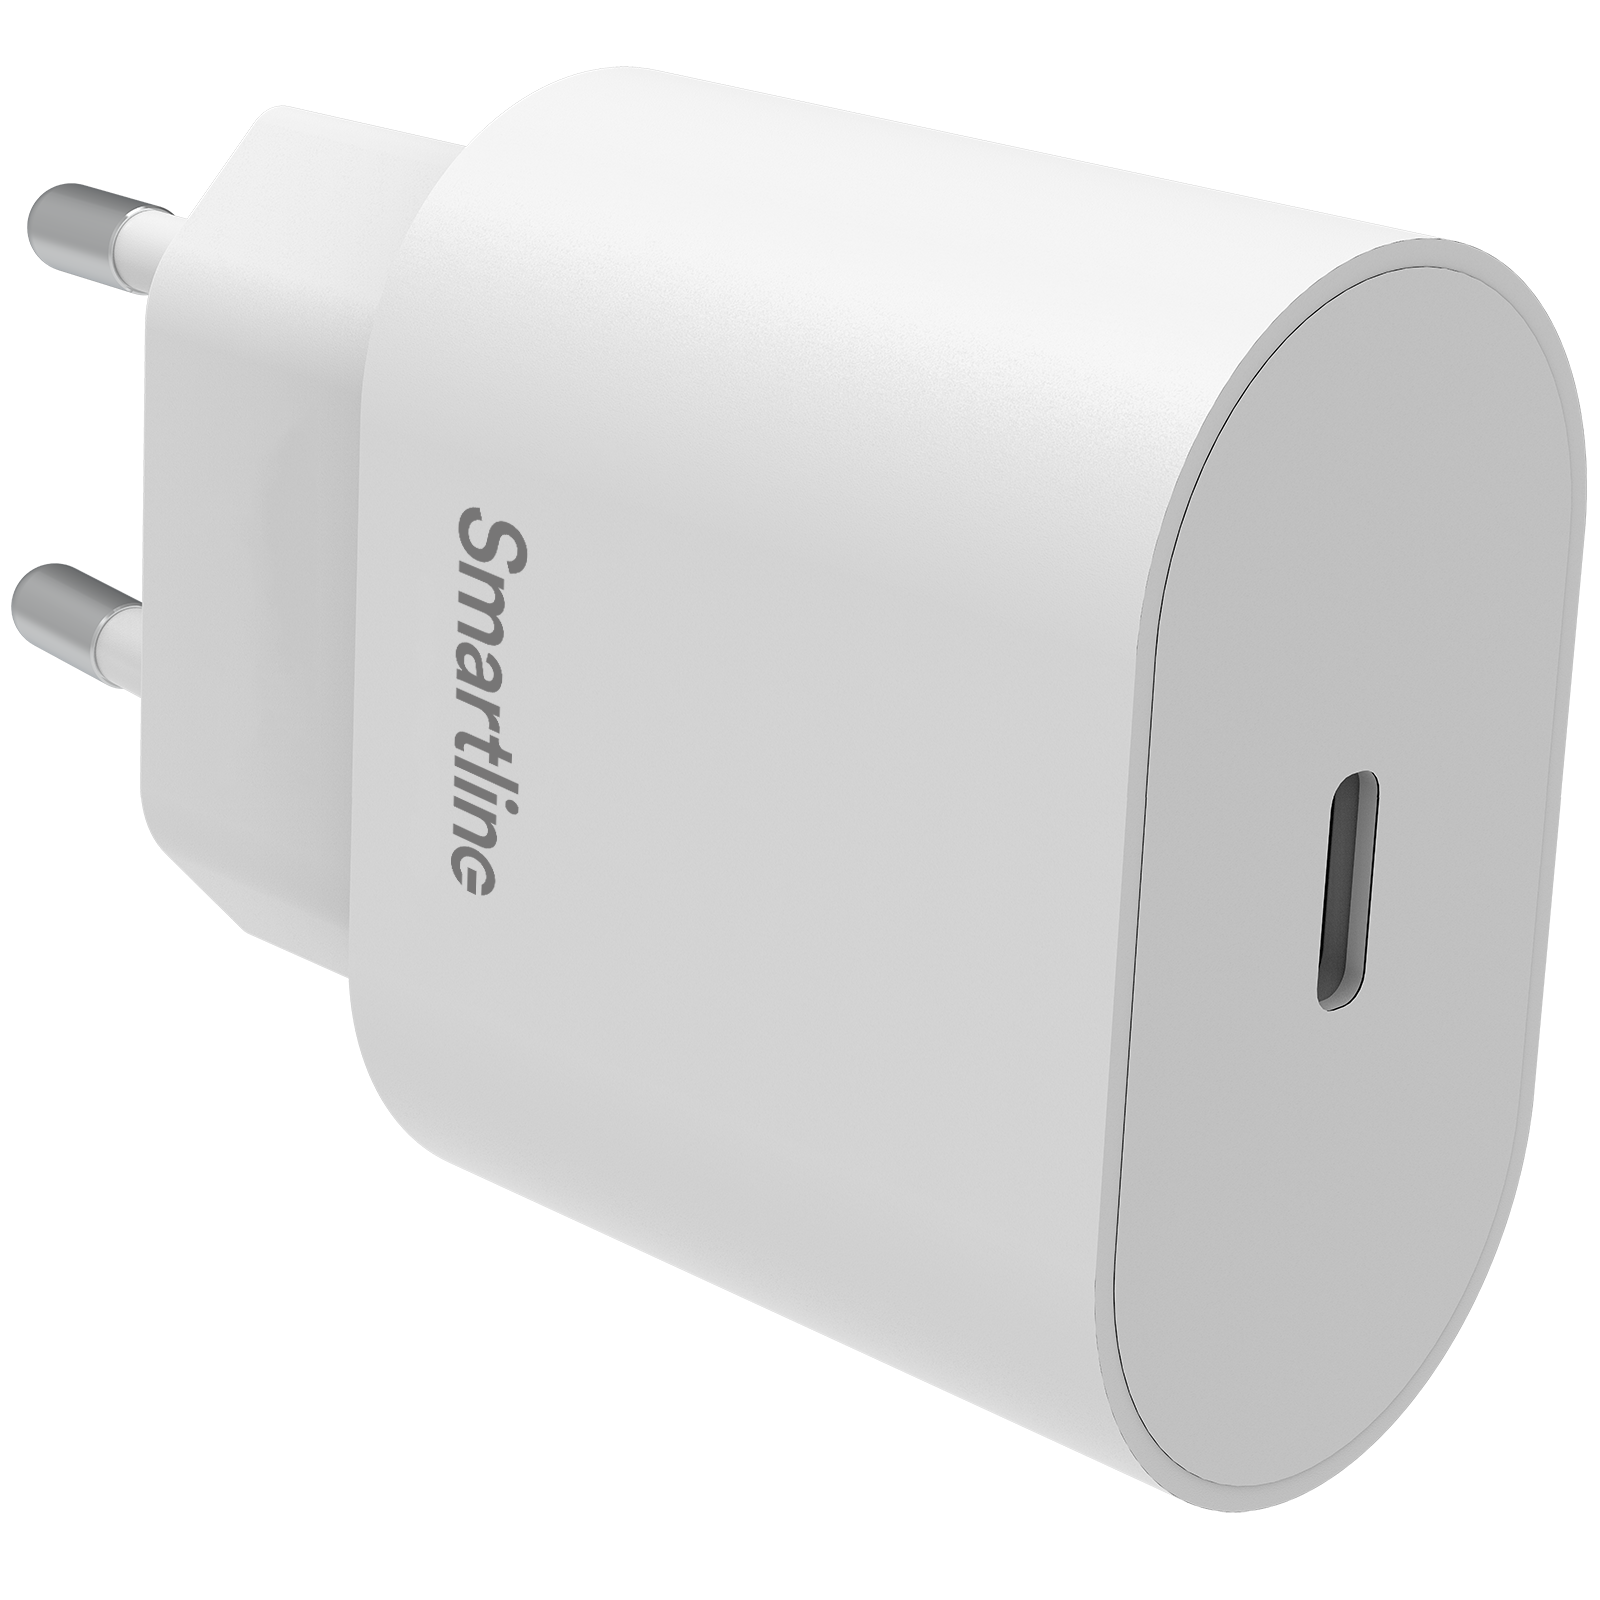 PD Wall Charger 20W USB-C hvid